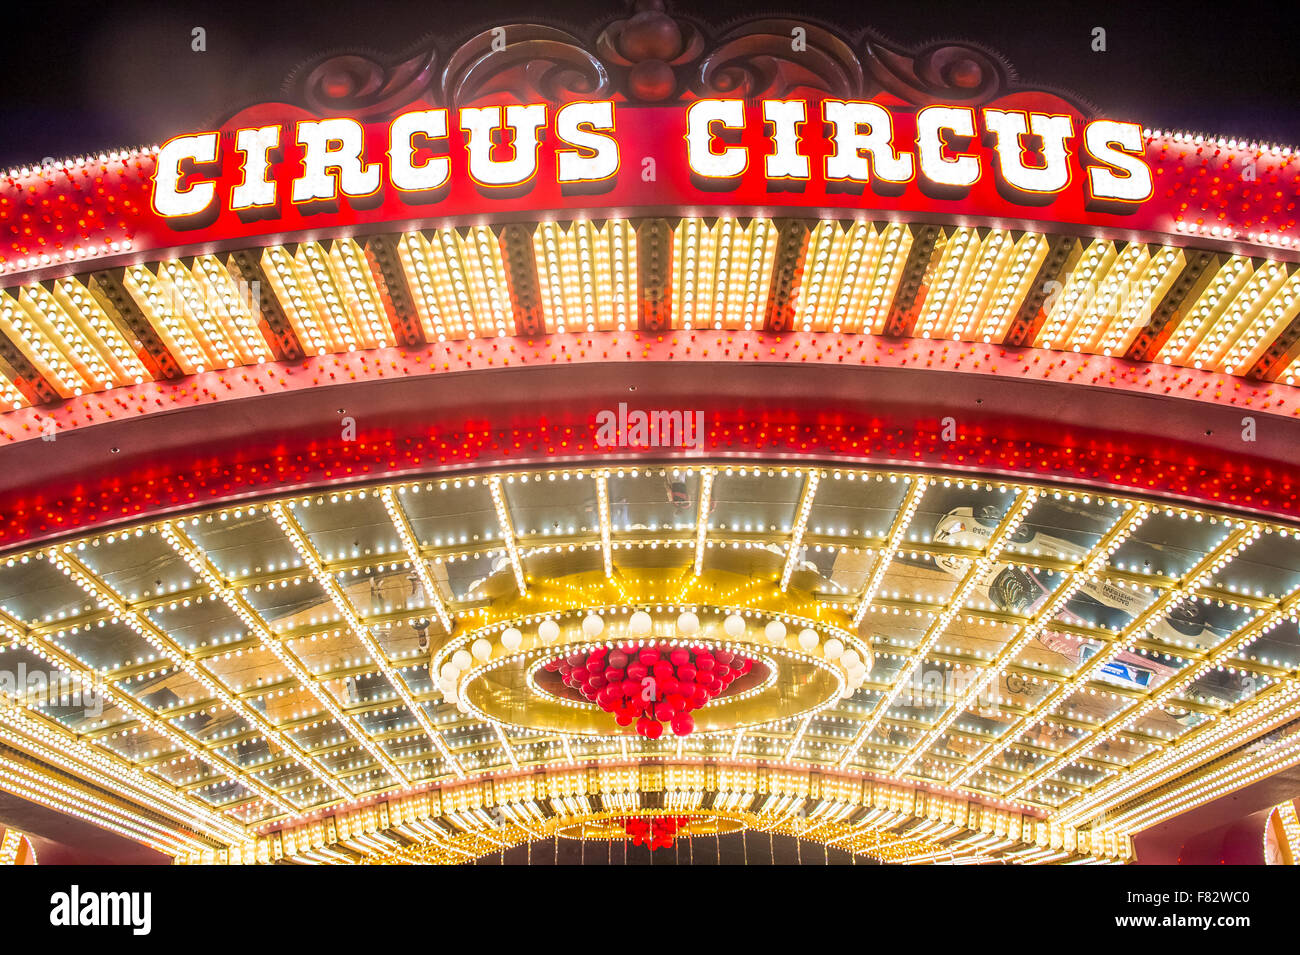 The Circus Circus hotel and casino sign in Las Vegas Stock Photo